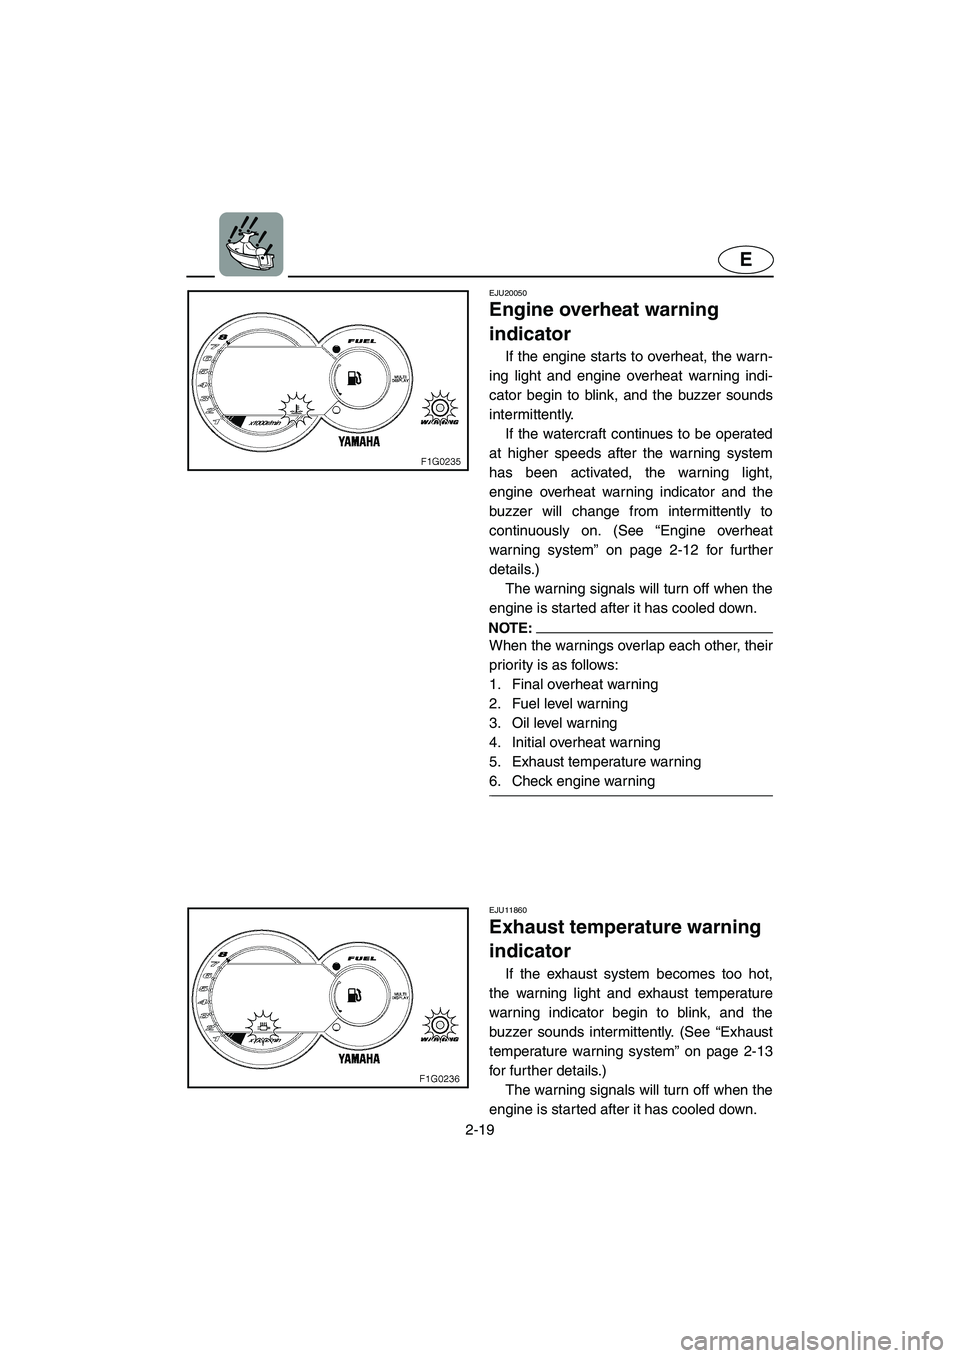 YAMAHA GP1300R 2003  Owners Manual 2-19
E
EJU20050
Engine overheat warning 
indicator 
If the engine starts to overheat, the warn-
ing light and engine overheat warning indi-
cator begin to blink, and the buzzer sounds
intermittently. 